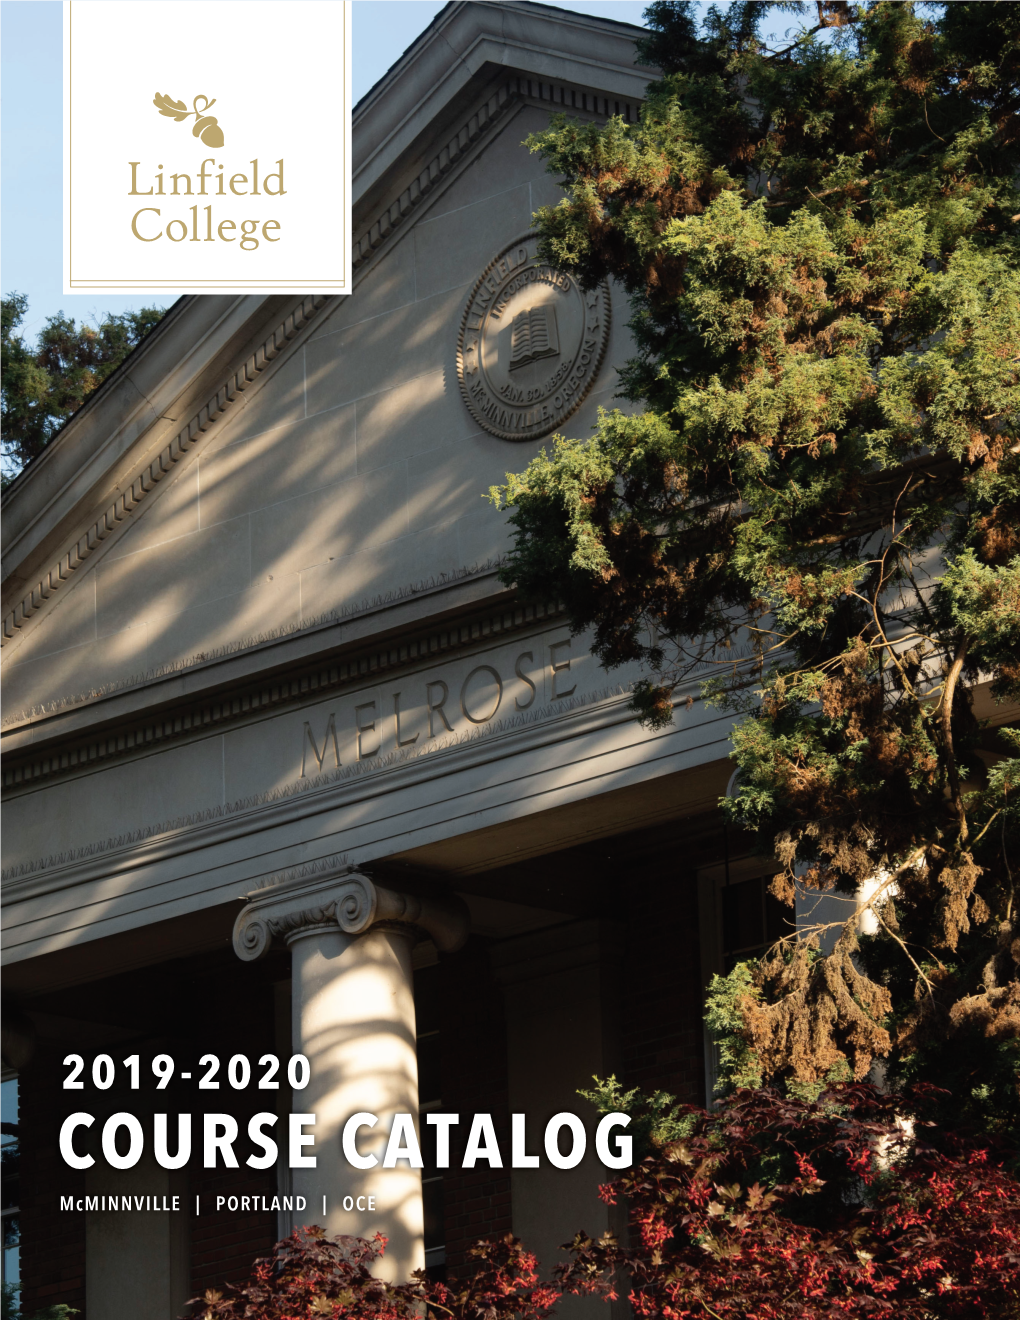 2019-2020 COURSE CATALOG Mcminnville | PORTLAND | OCE Linfield College Is Regionally Accredited by the Northwest Commission on Colleges and Universities